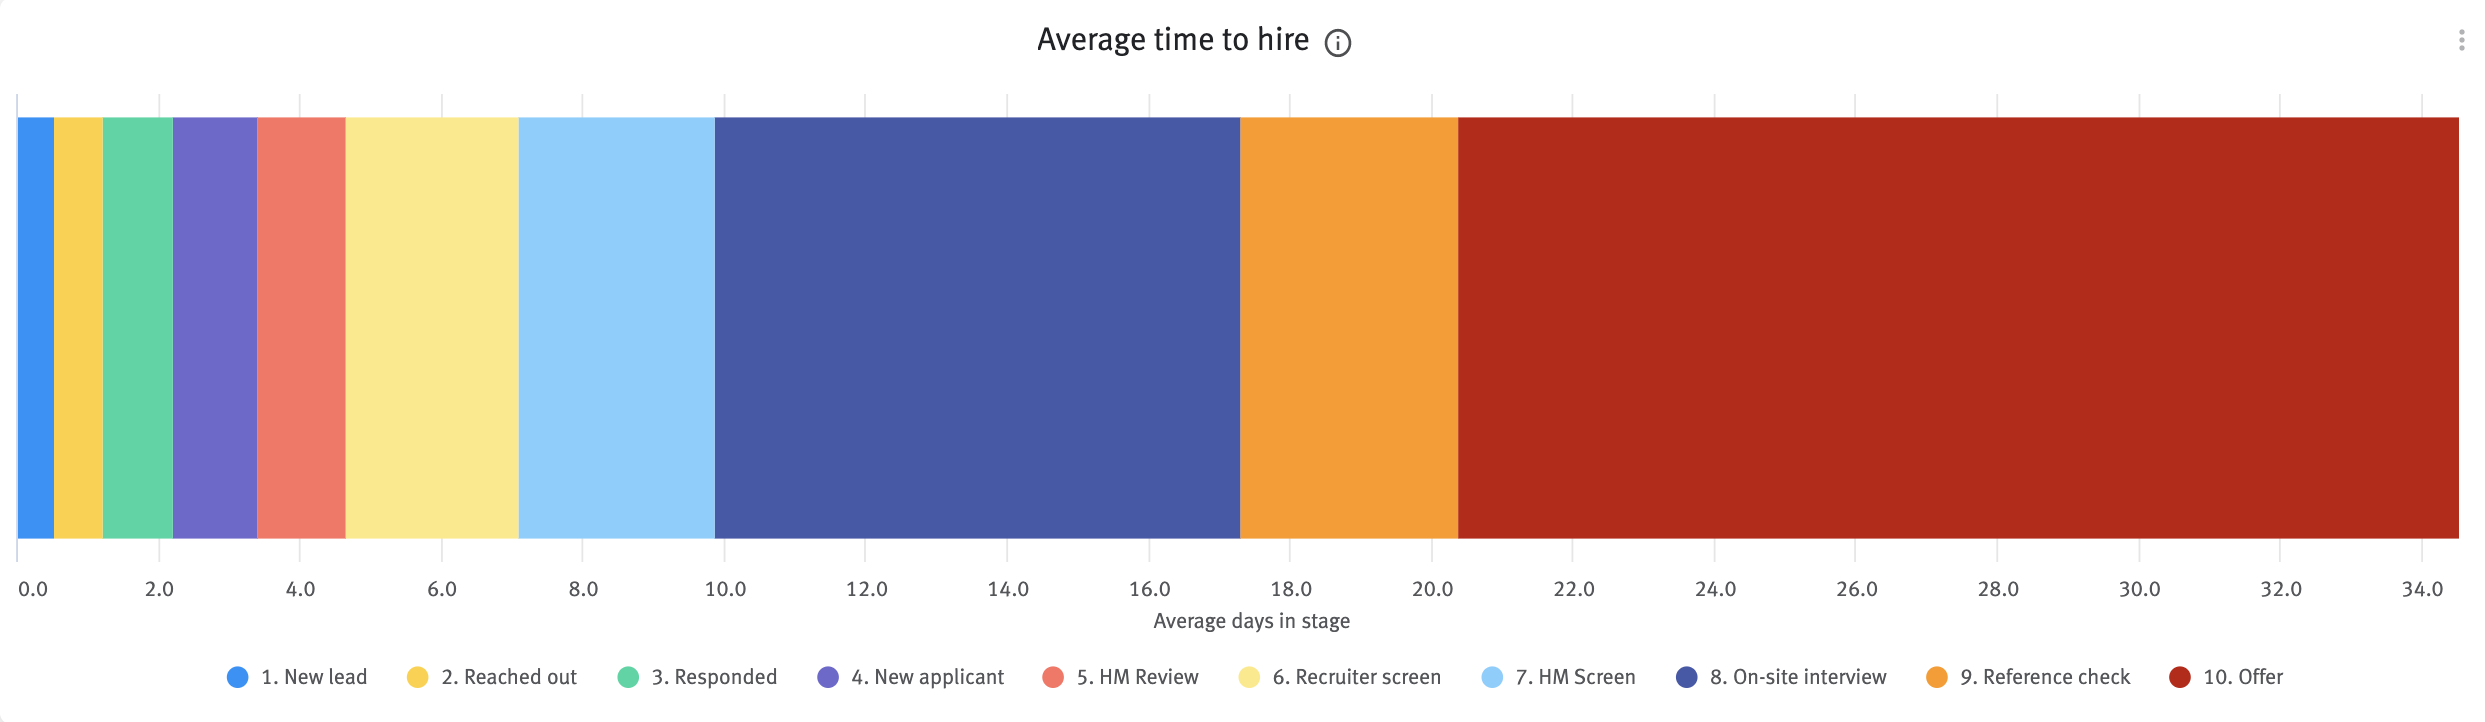 Average time to hire chart